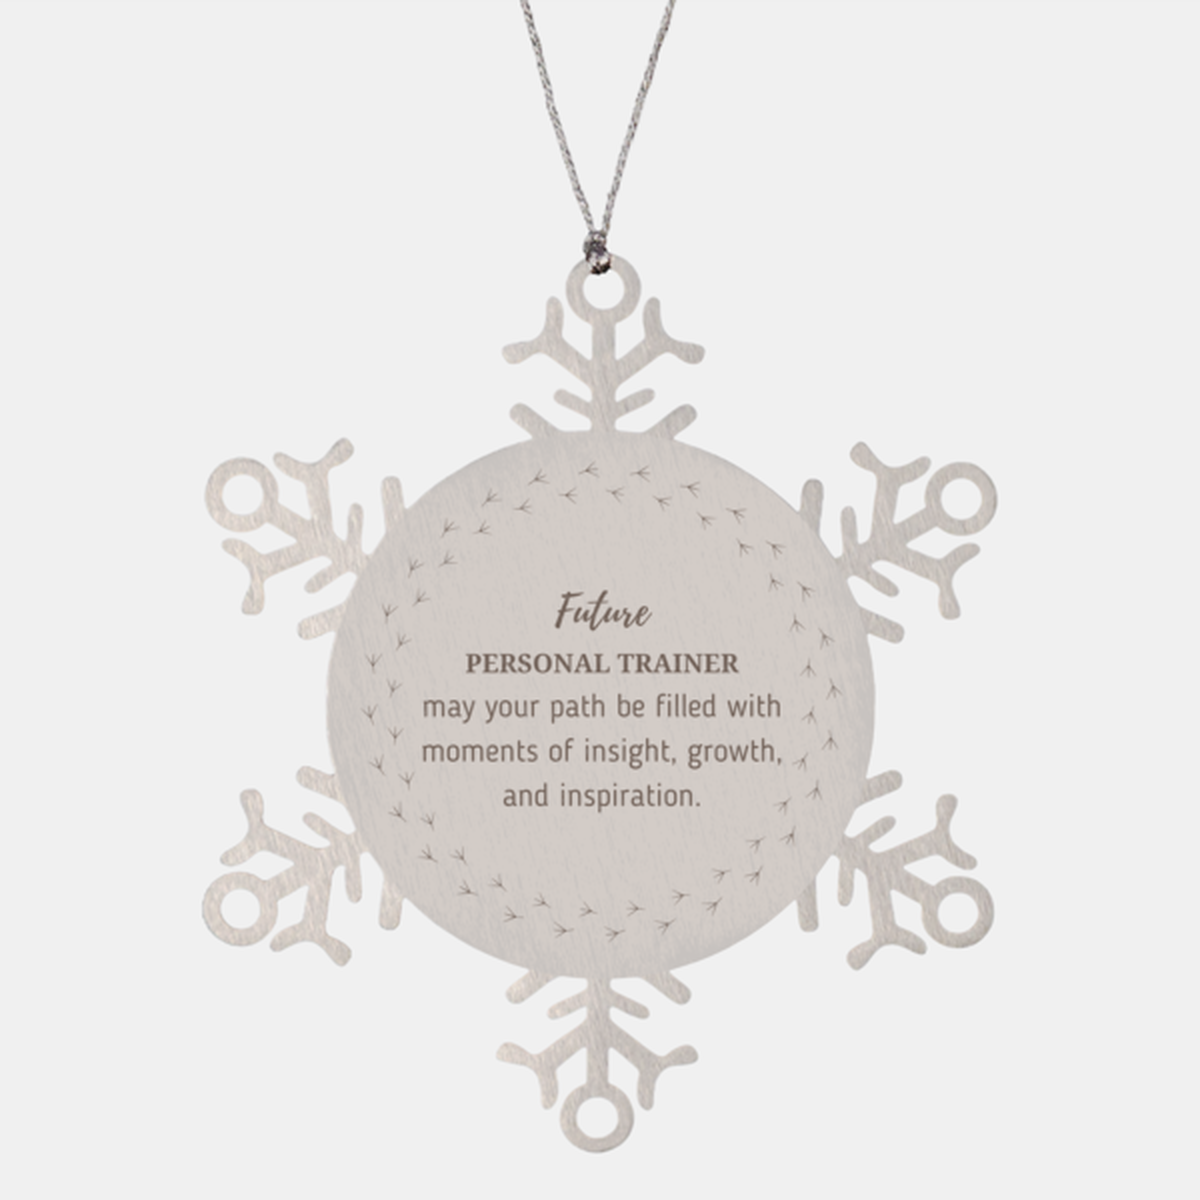 Future Personal Trainer Gifts, May your path be filled with moments of insight, Graduation Gifts for New Personal Trainer, Christmas Unique Snowflake Ornament For Men, Women, Friends